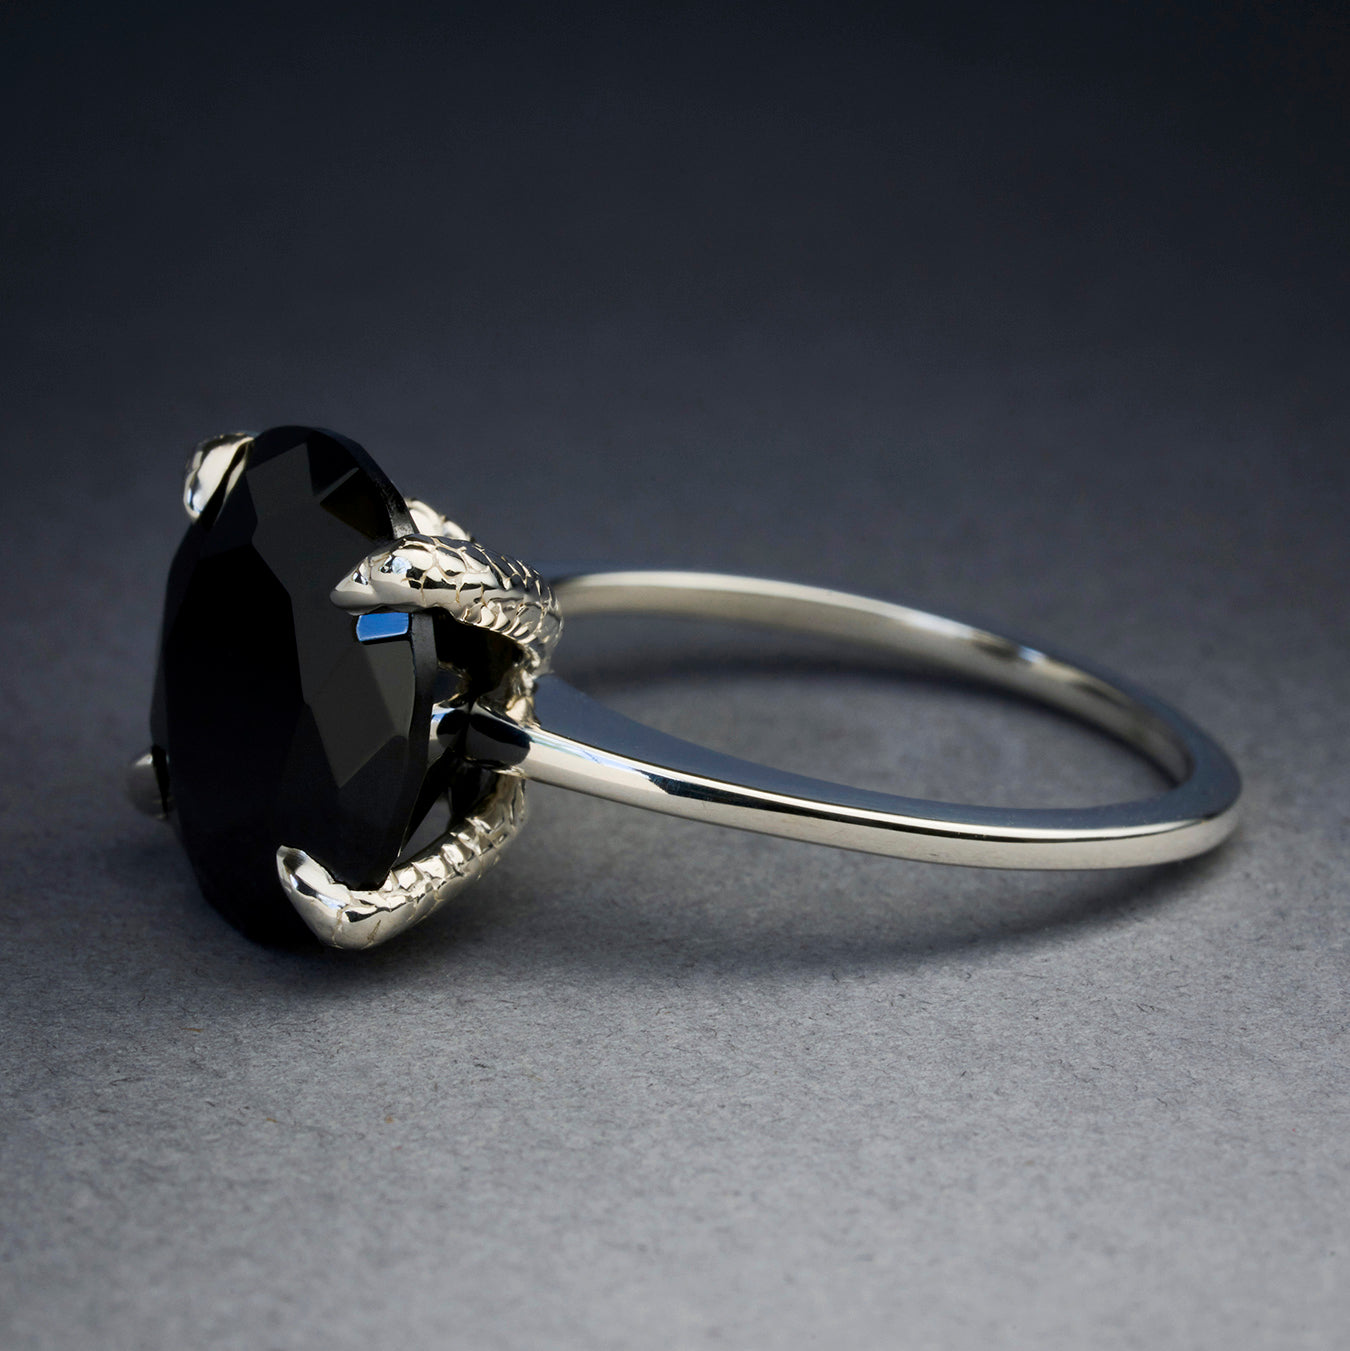 Buy BLACK STONE RING, Statement Ring, Gold Black Ring, Oval Ring, Ring,  Bridesmaid Ring, Gemstone Ring, Gift for Her,open Crystal Ring Online in  India - Etsy